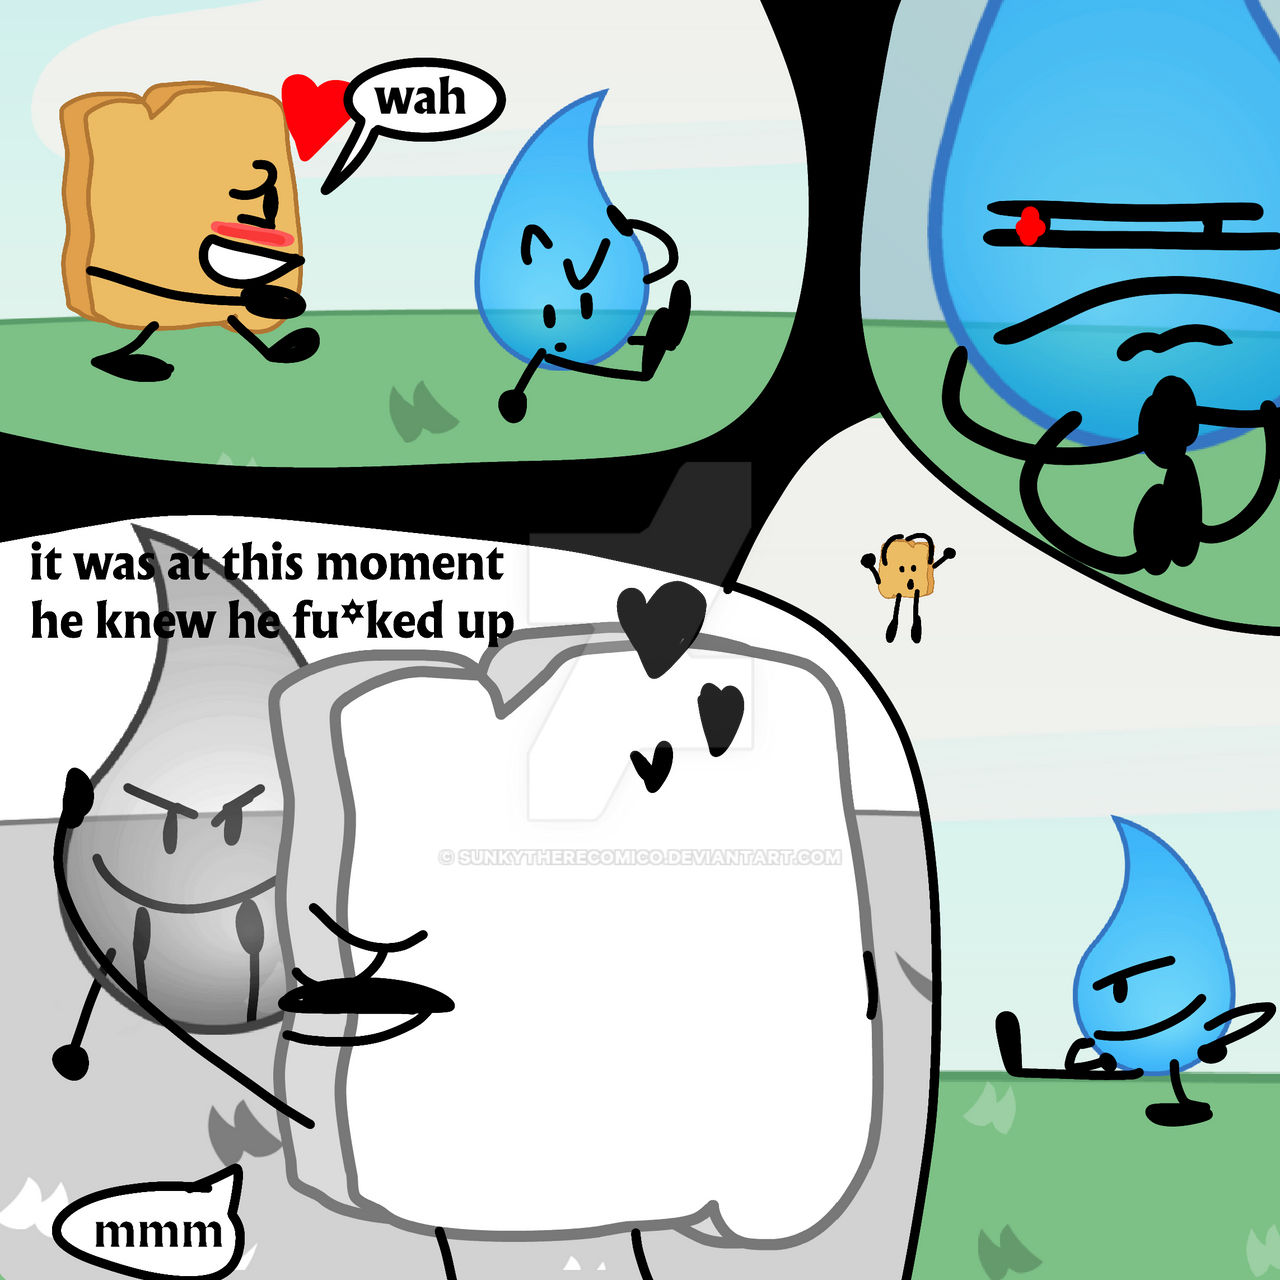 Bfdi 1a recreation in comic format by Sunkytherecomico on DeviantArt